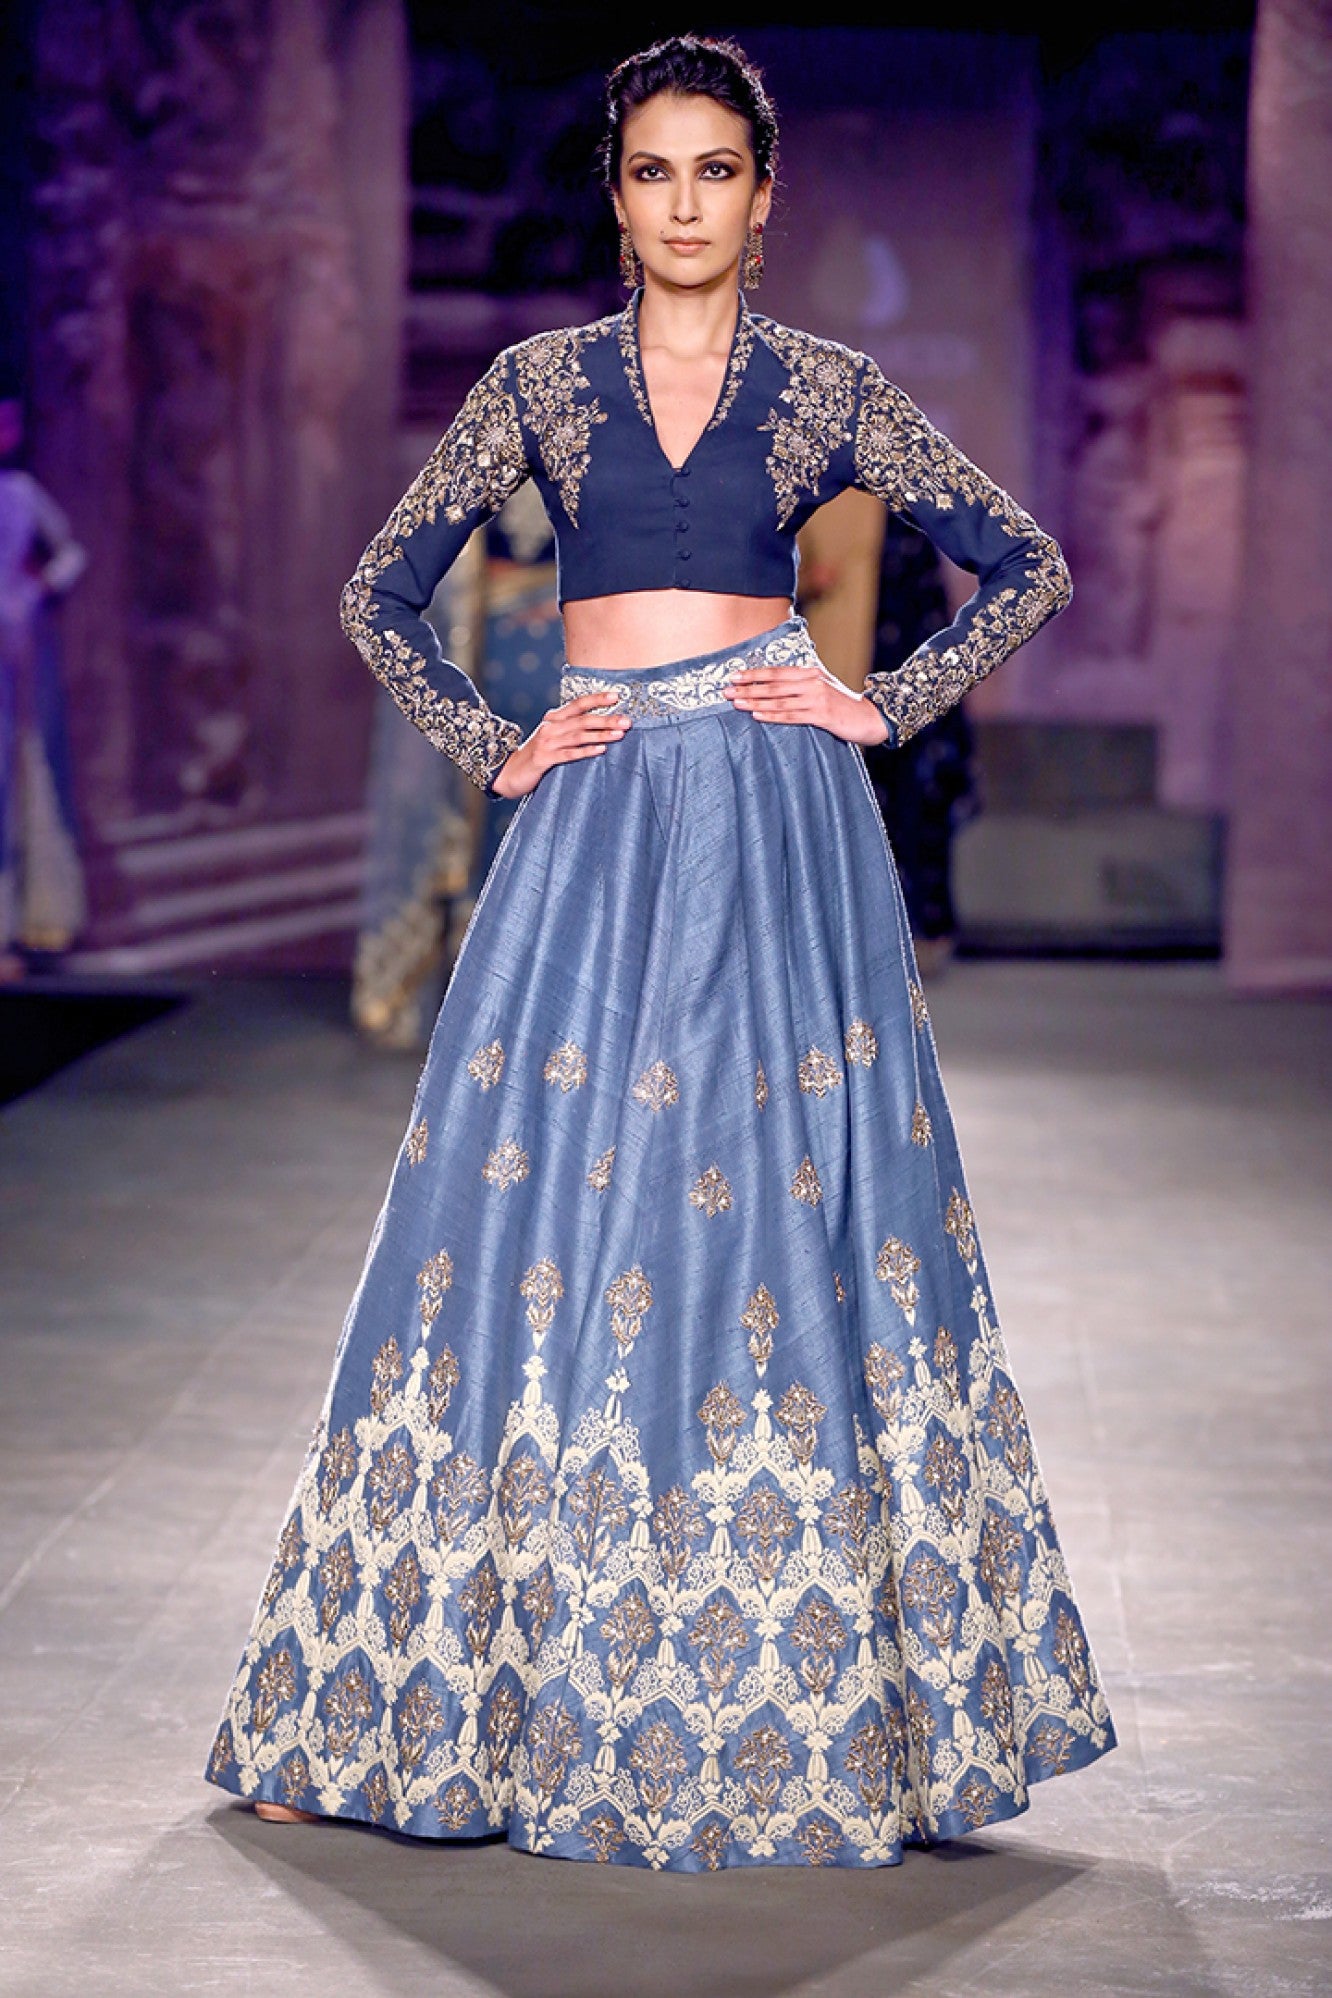 Powder blue lehenga skirt with Navy blue embroidered blouse